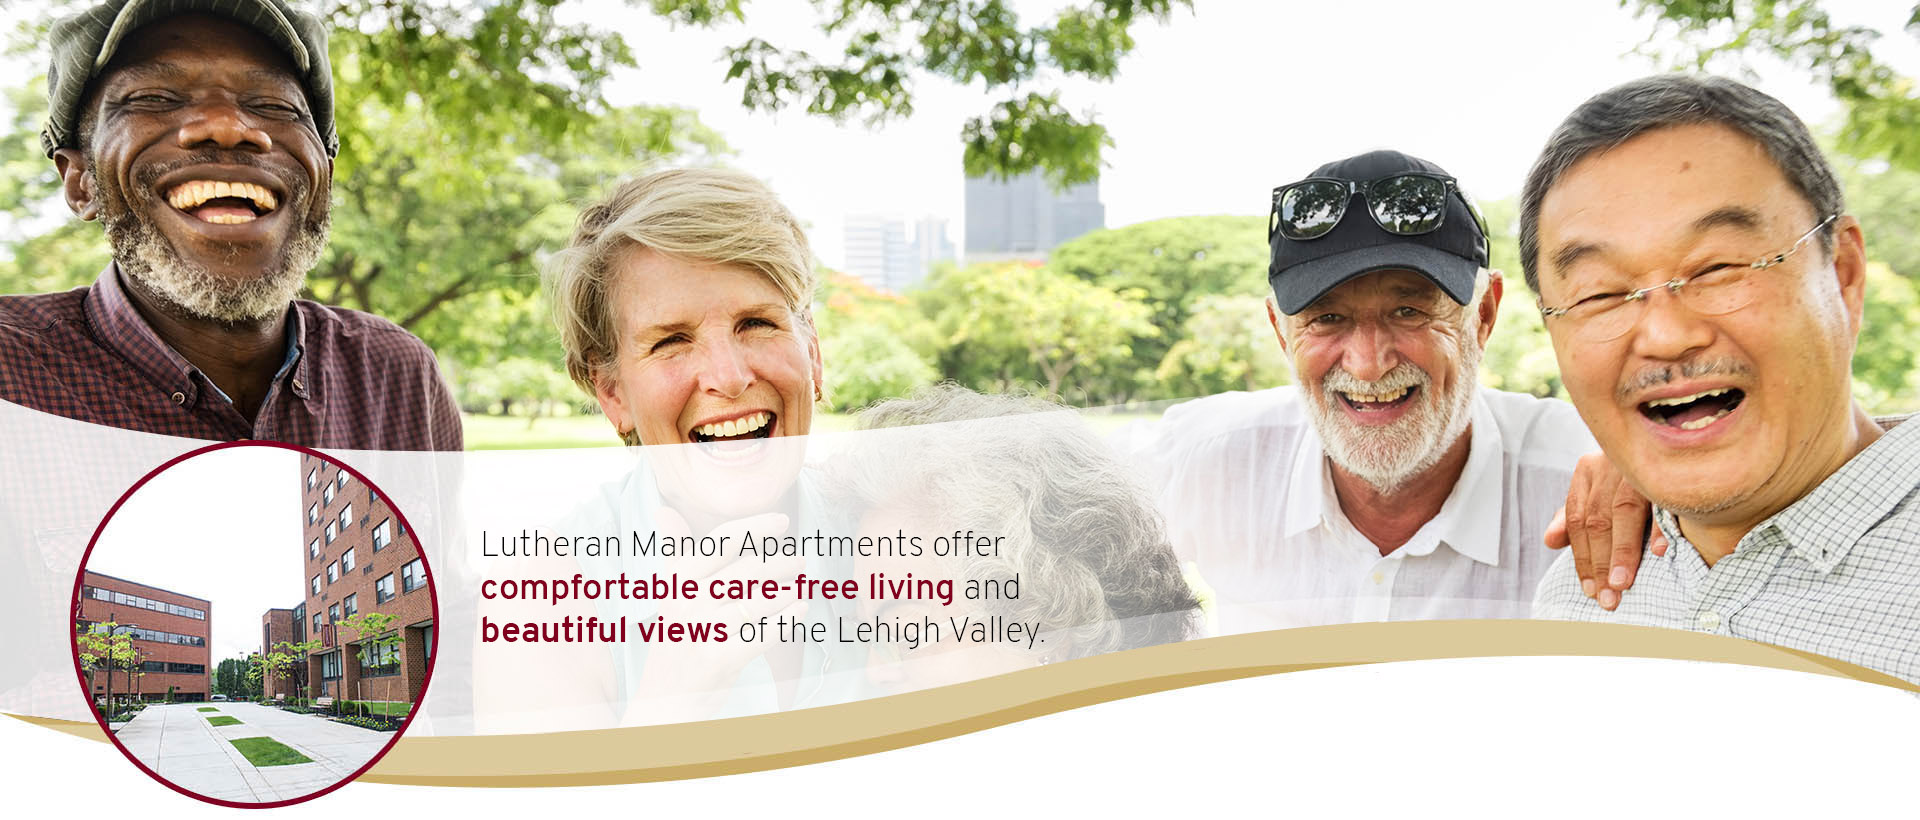 comfortable care-free living and beautiful views of the Lehigh Valley.